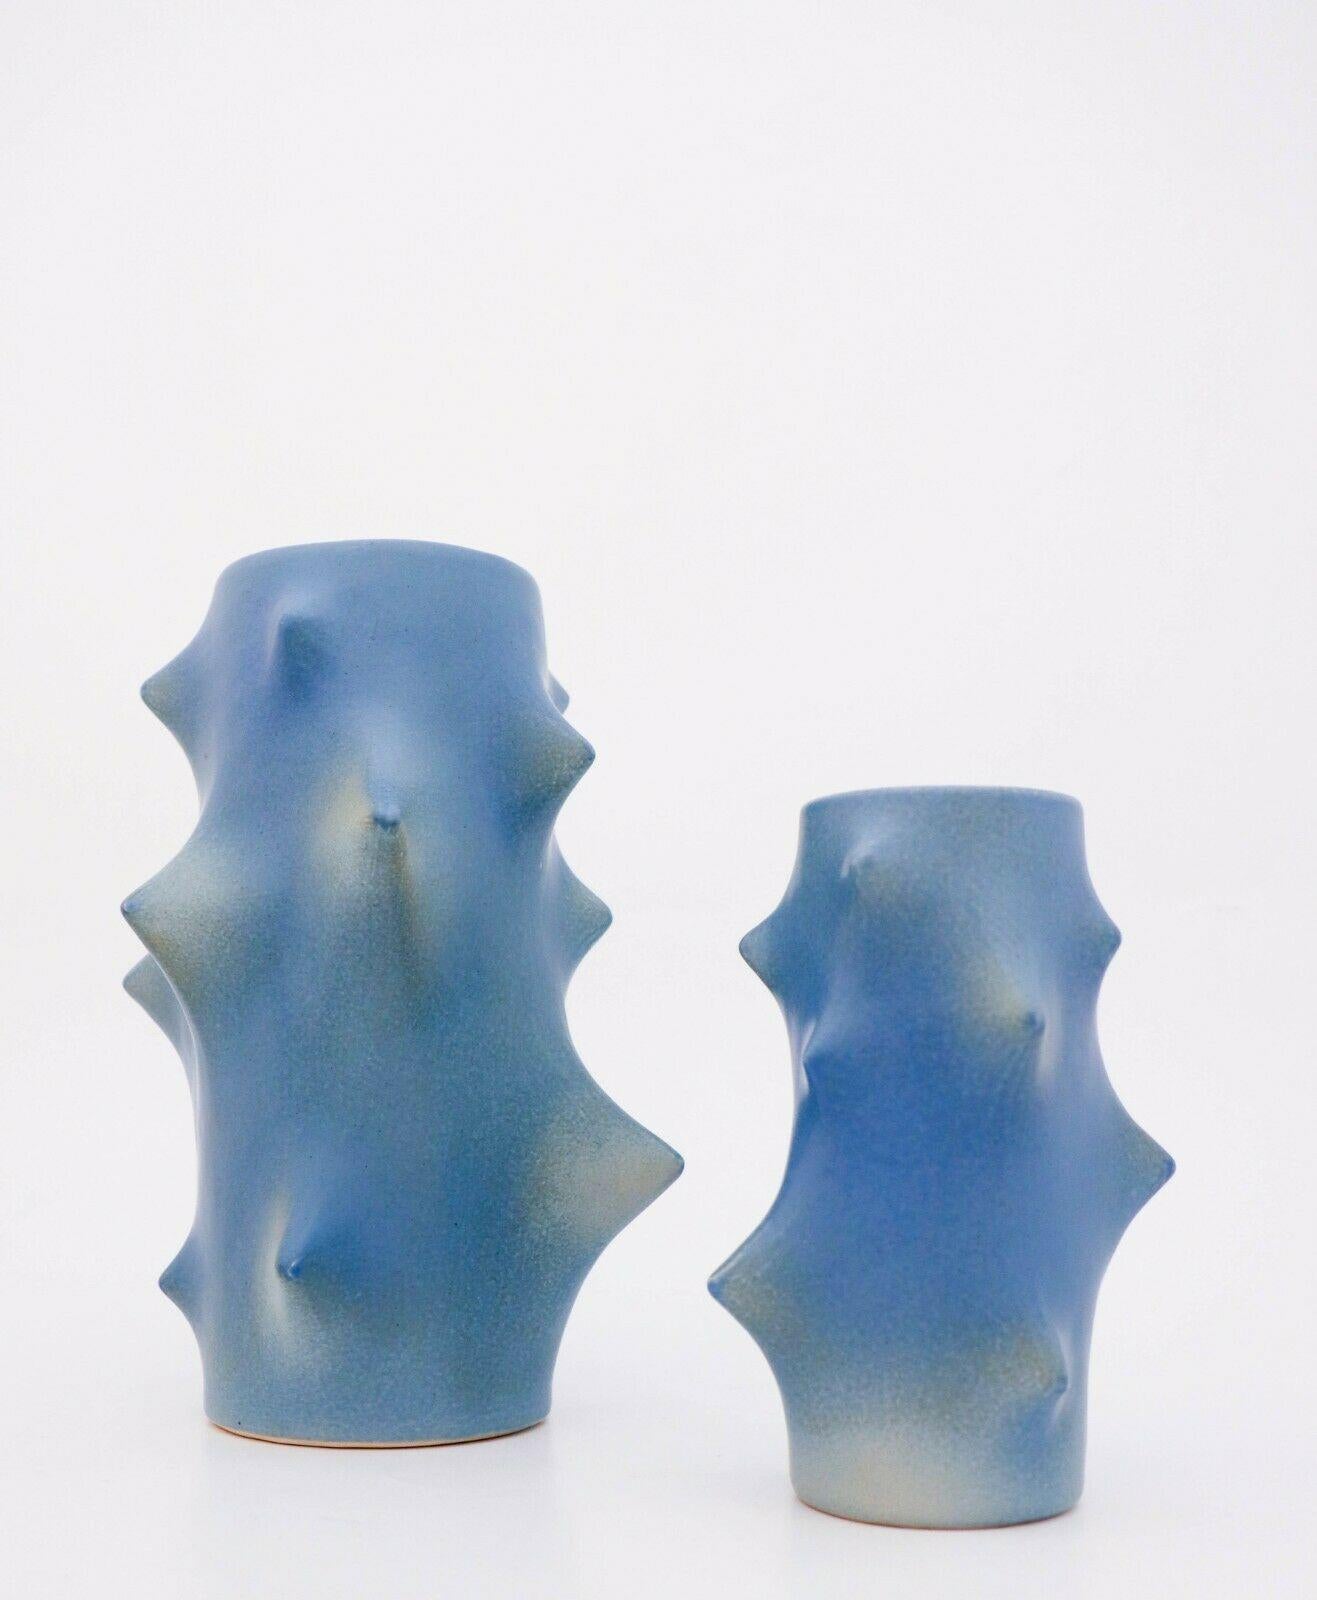 Pair of vases in ceramics designed by the danish designer Knud Basse at Michael Andersen in Denmark in the 1950s. The larger vase is 26 cm high and the smaller one is 17.5 cm high.